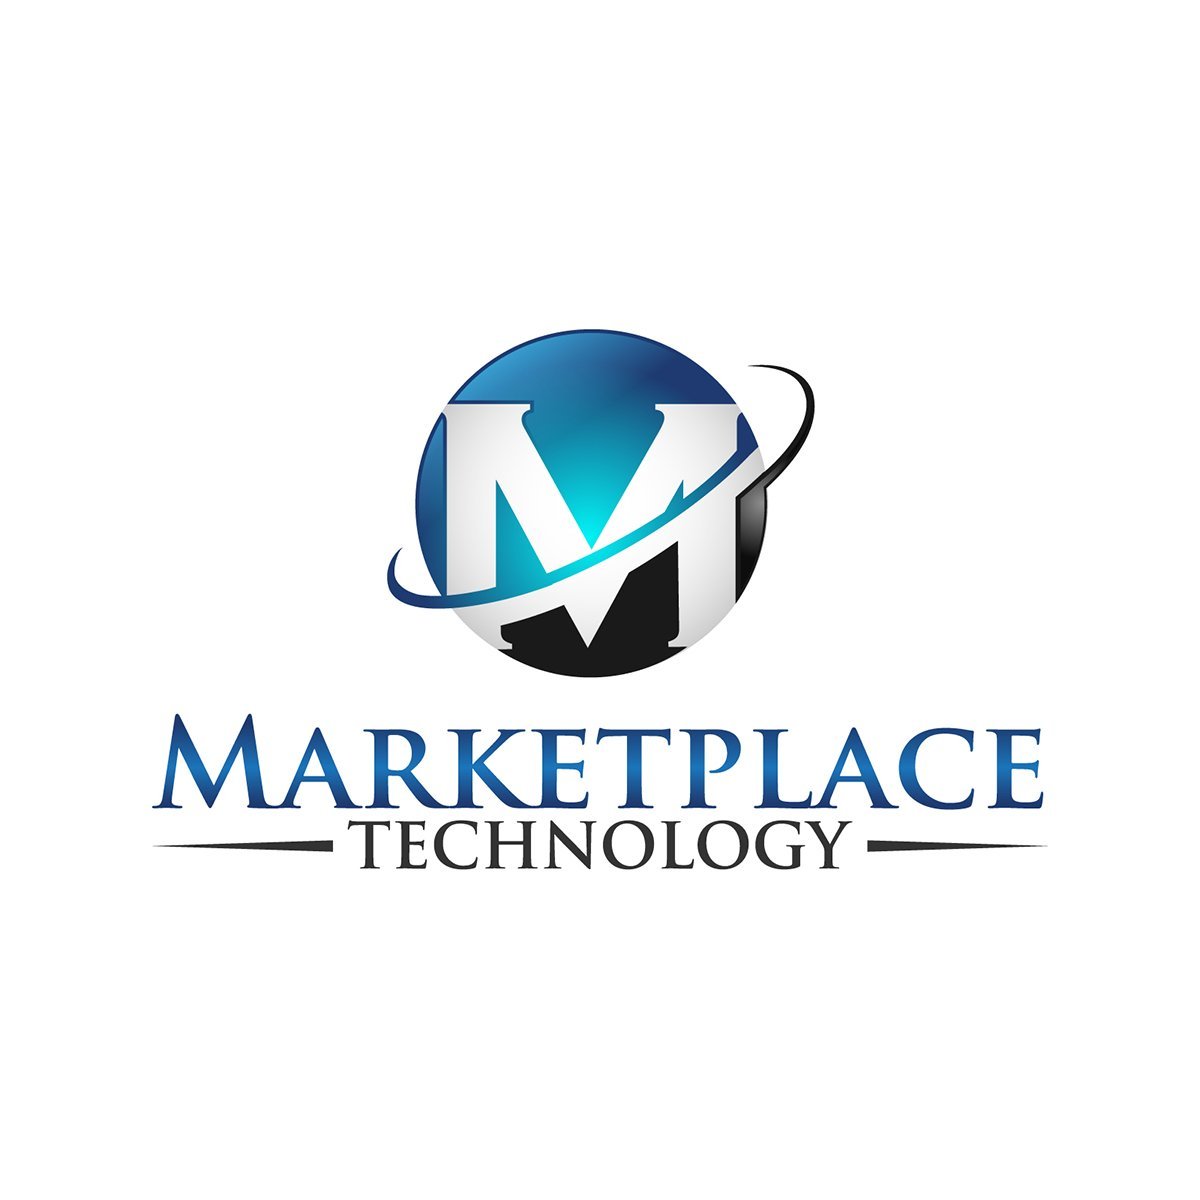 Marketplace Technology Limited is a UK distributor, providing a wide range of computer components and electronics. #GPU #CPU #Motherboards #Laptops #Followback